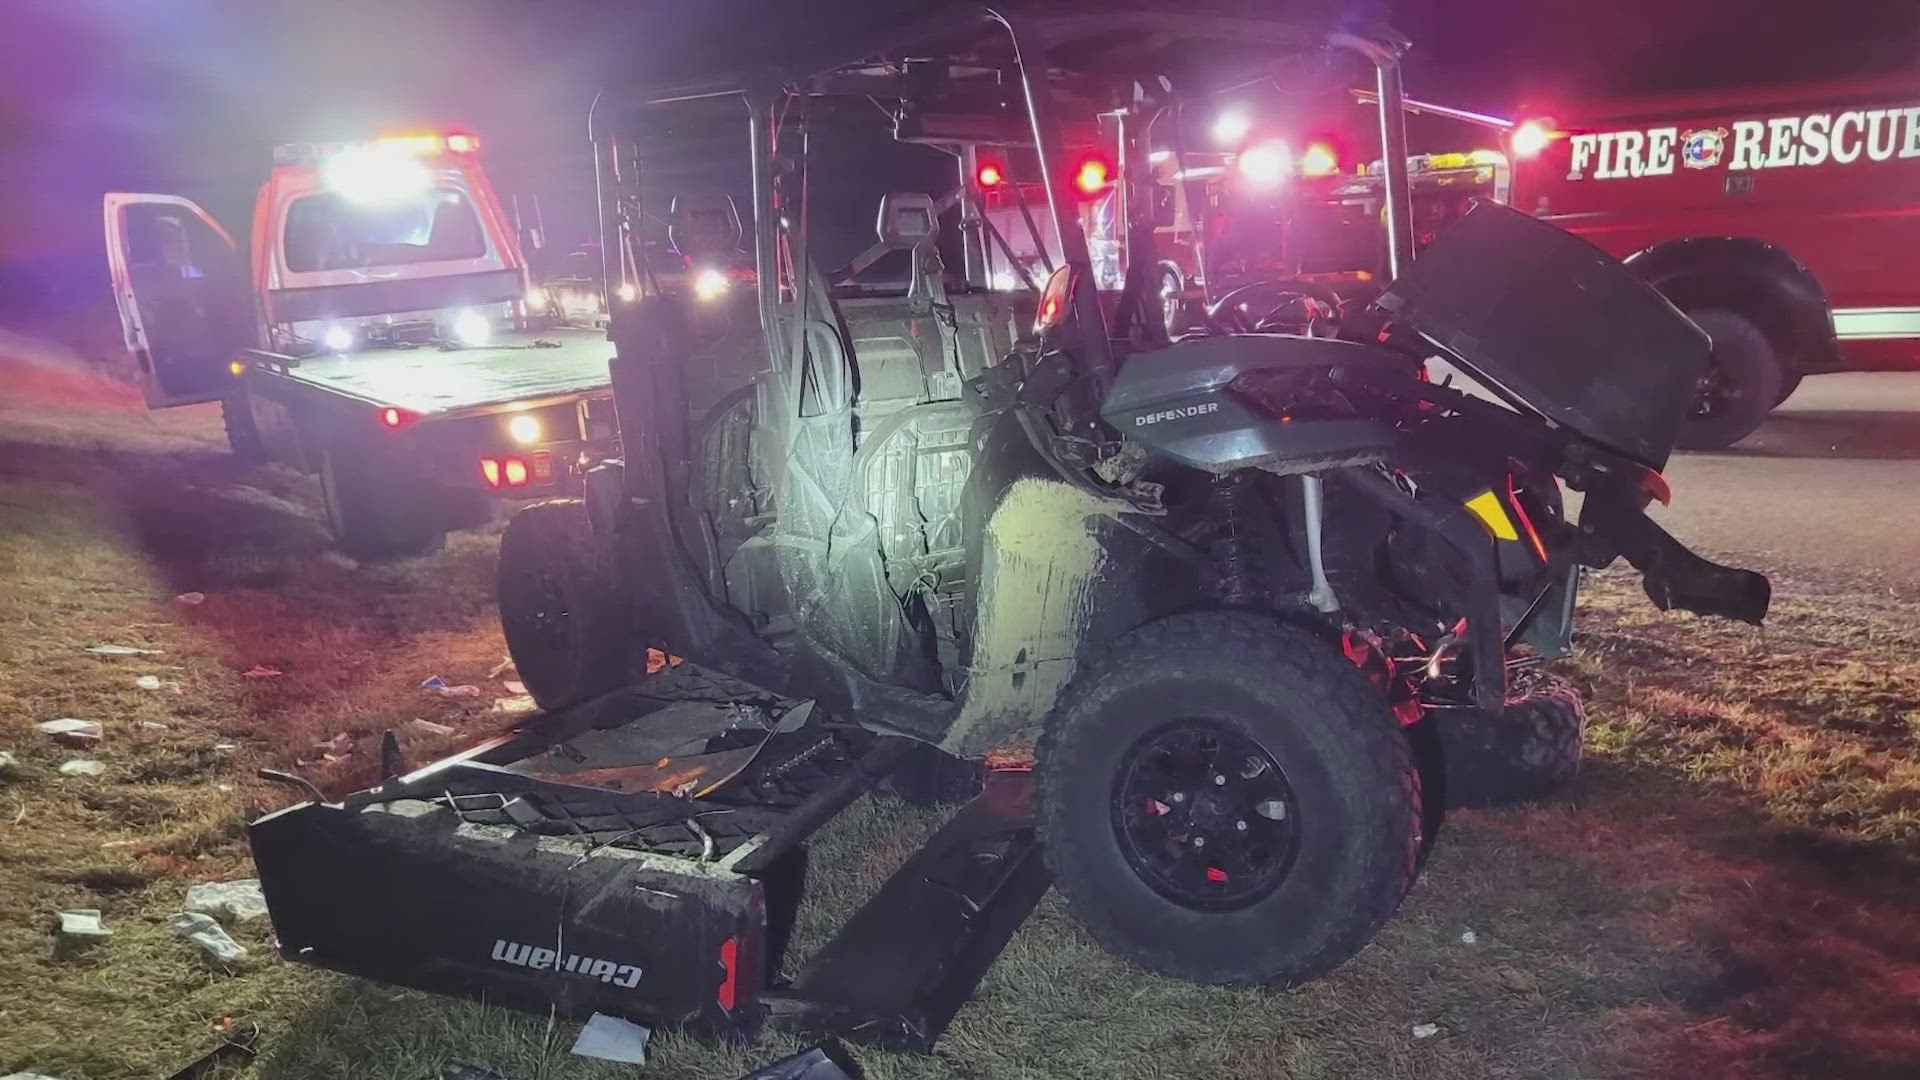 Texas state troopers say teens in an off-road UTV ran a stop sign and crashed into a pickup truck that had the right of way.